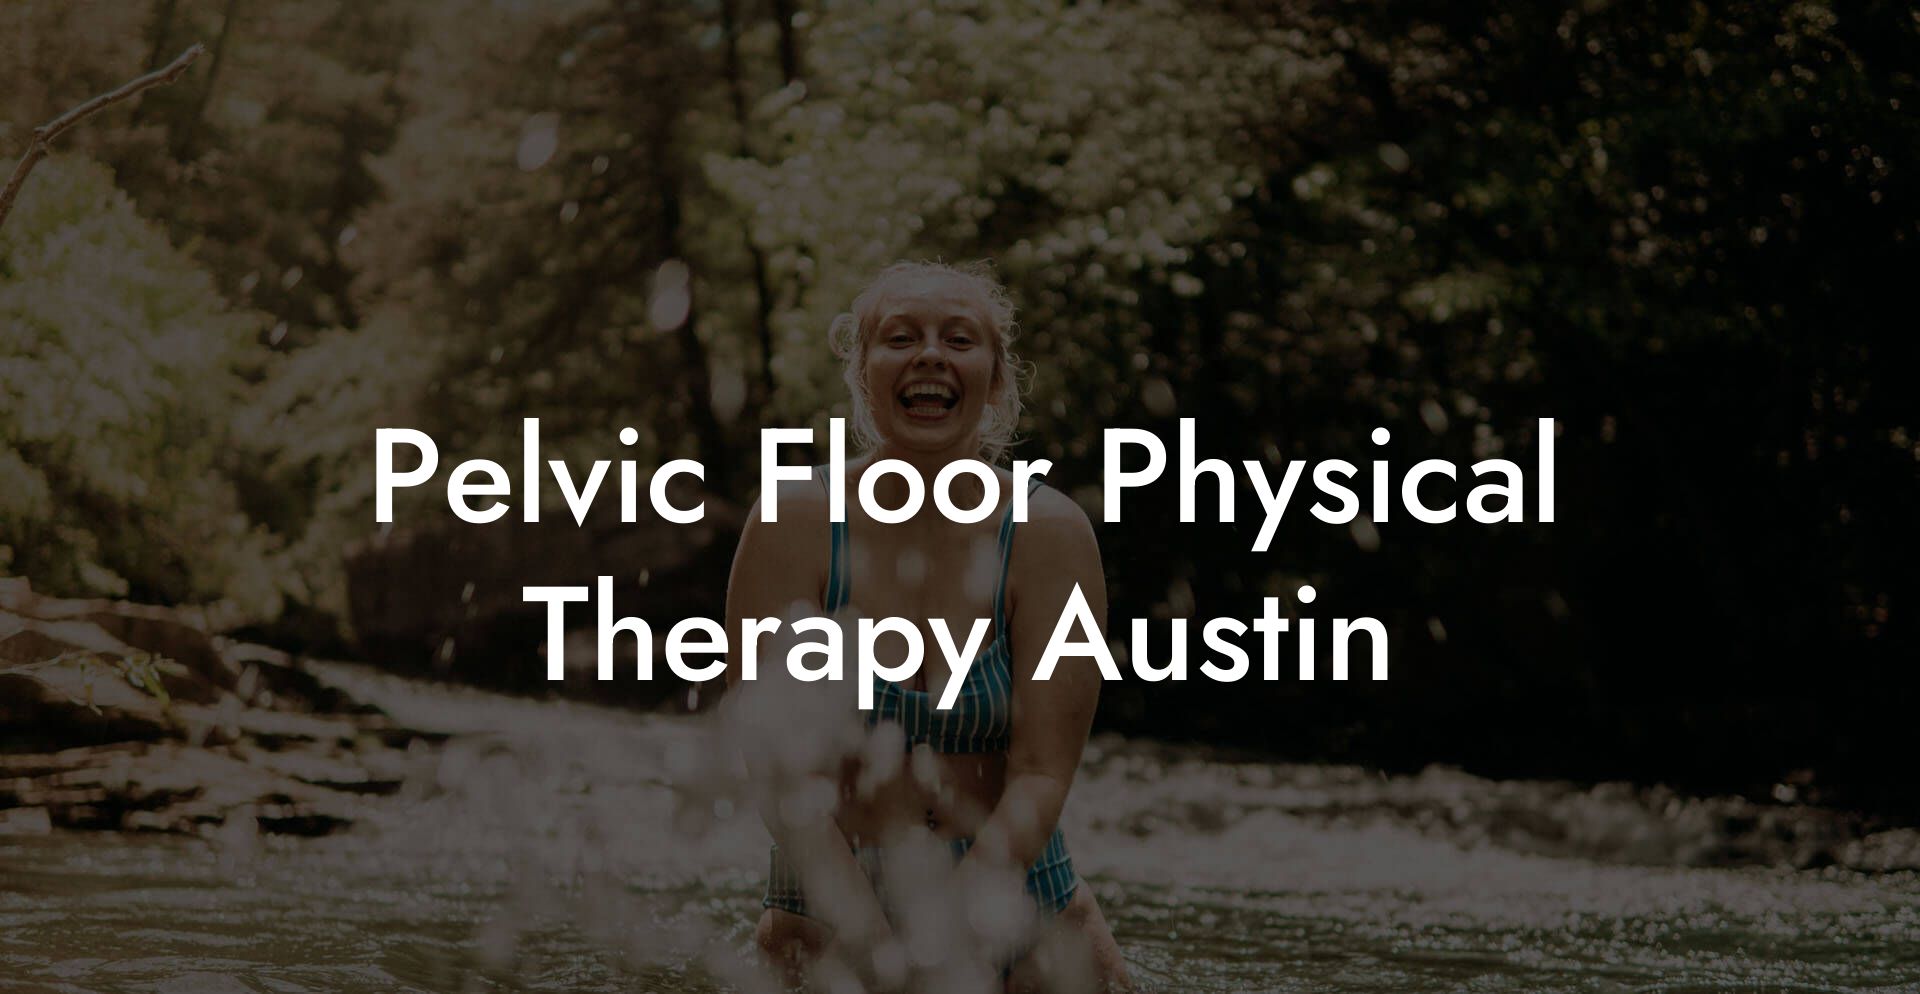 Pelvic Floor Physical Therapy Austin